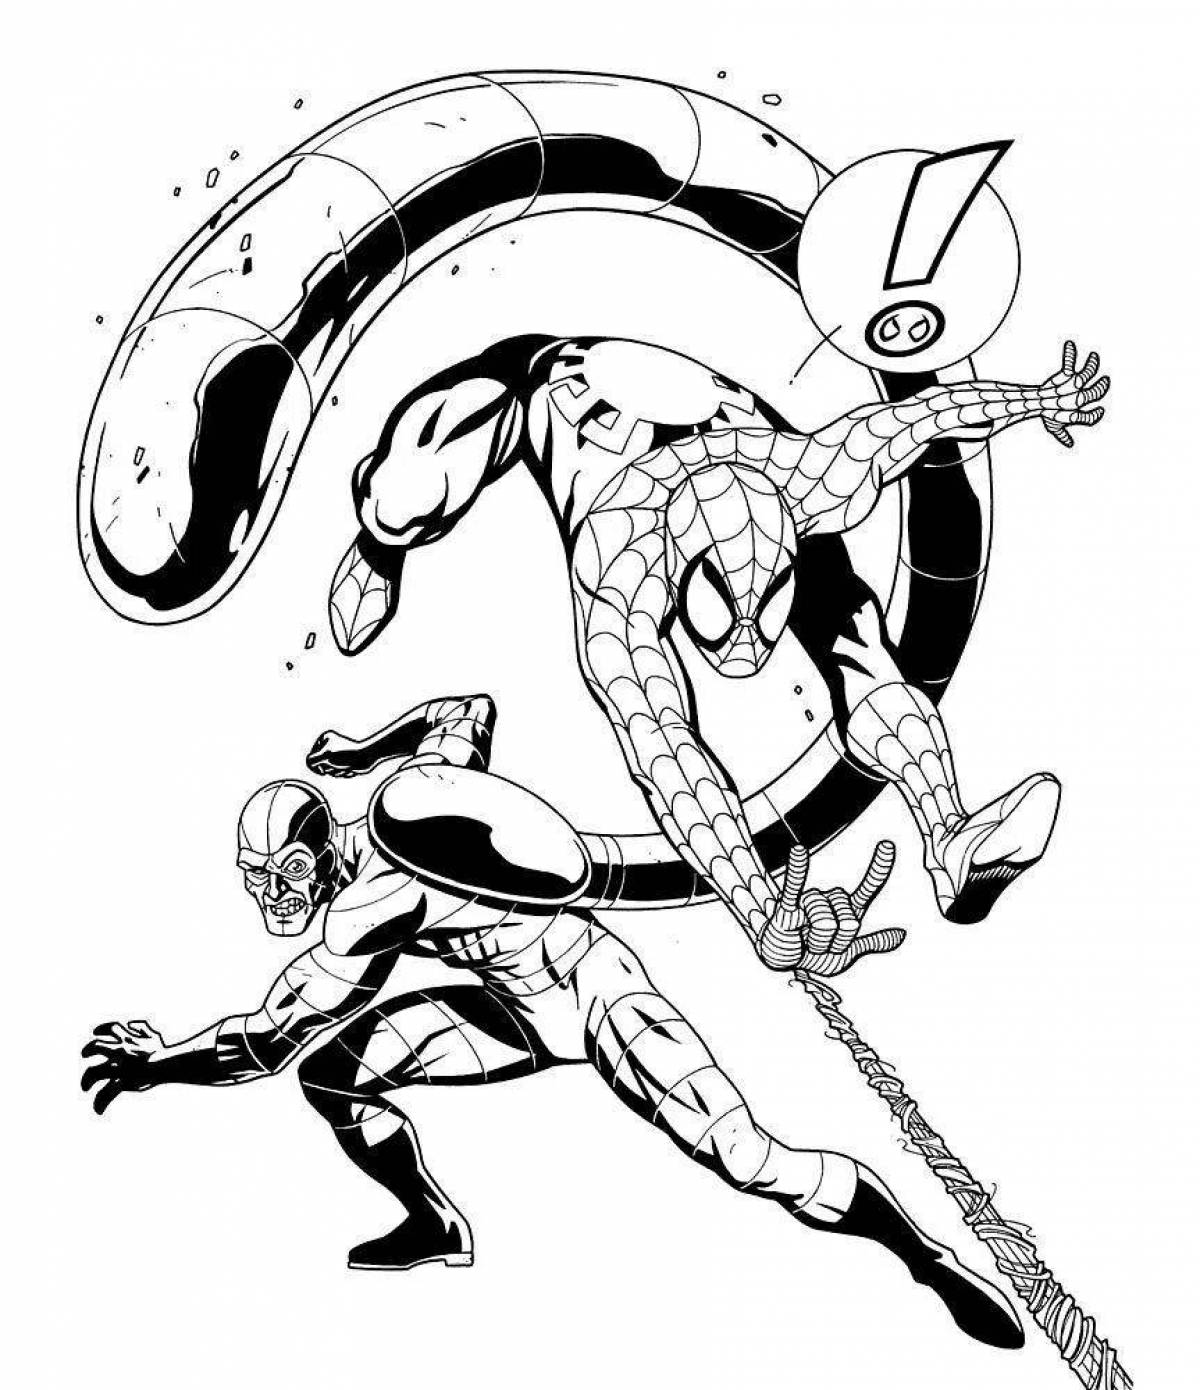 Marvel spiderman deluxe coloring page